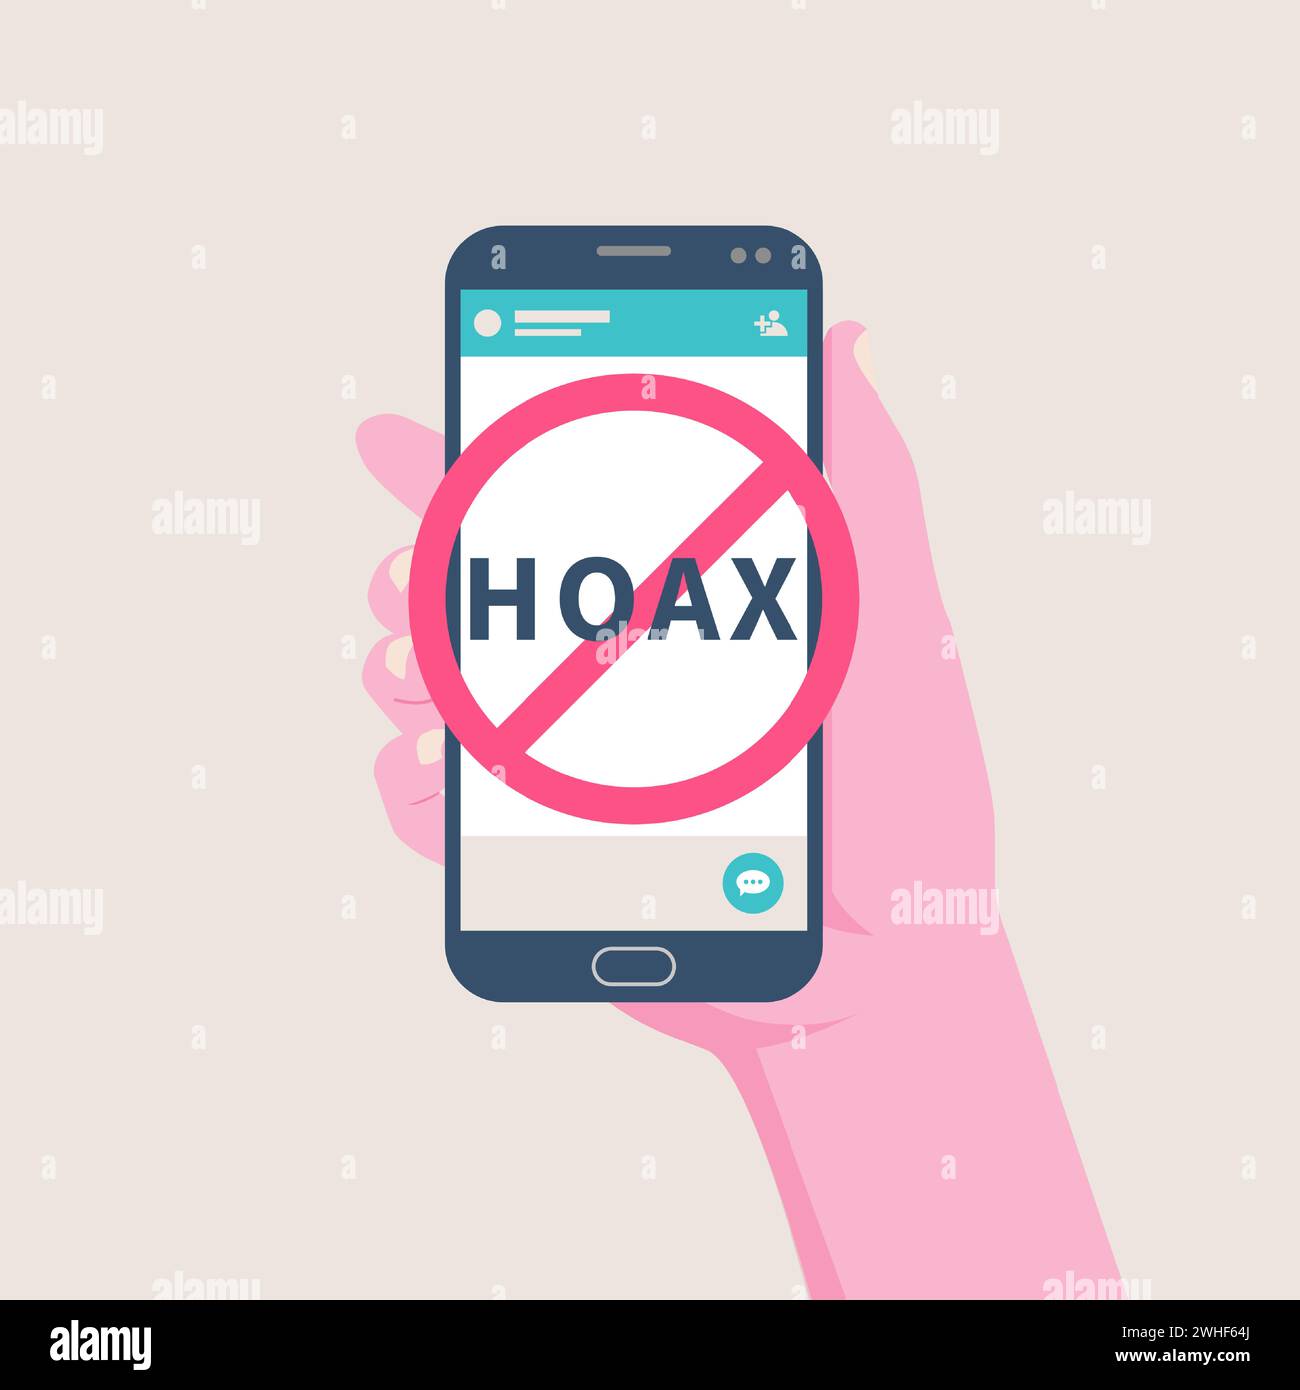 hoax news spread using group chat messaging app smart phone on hands vector Stock Vector